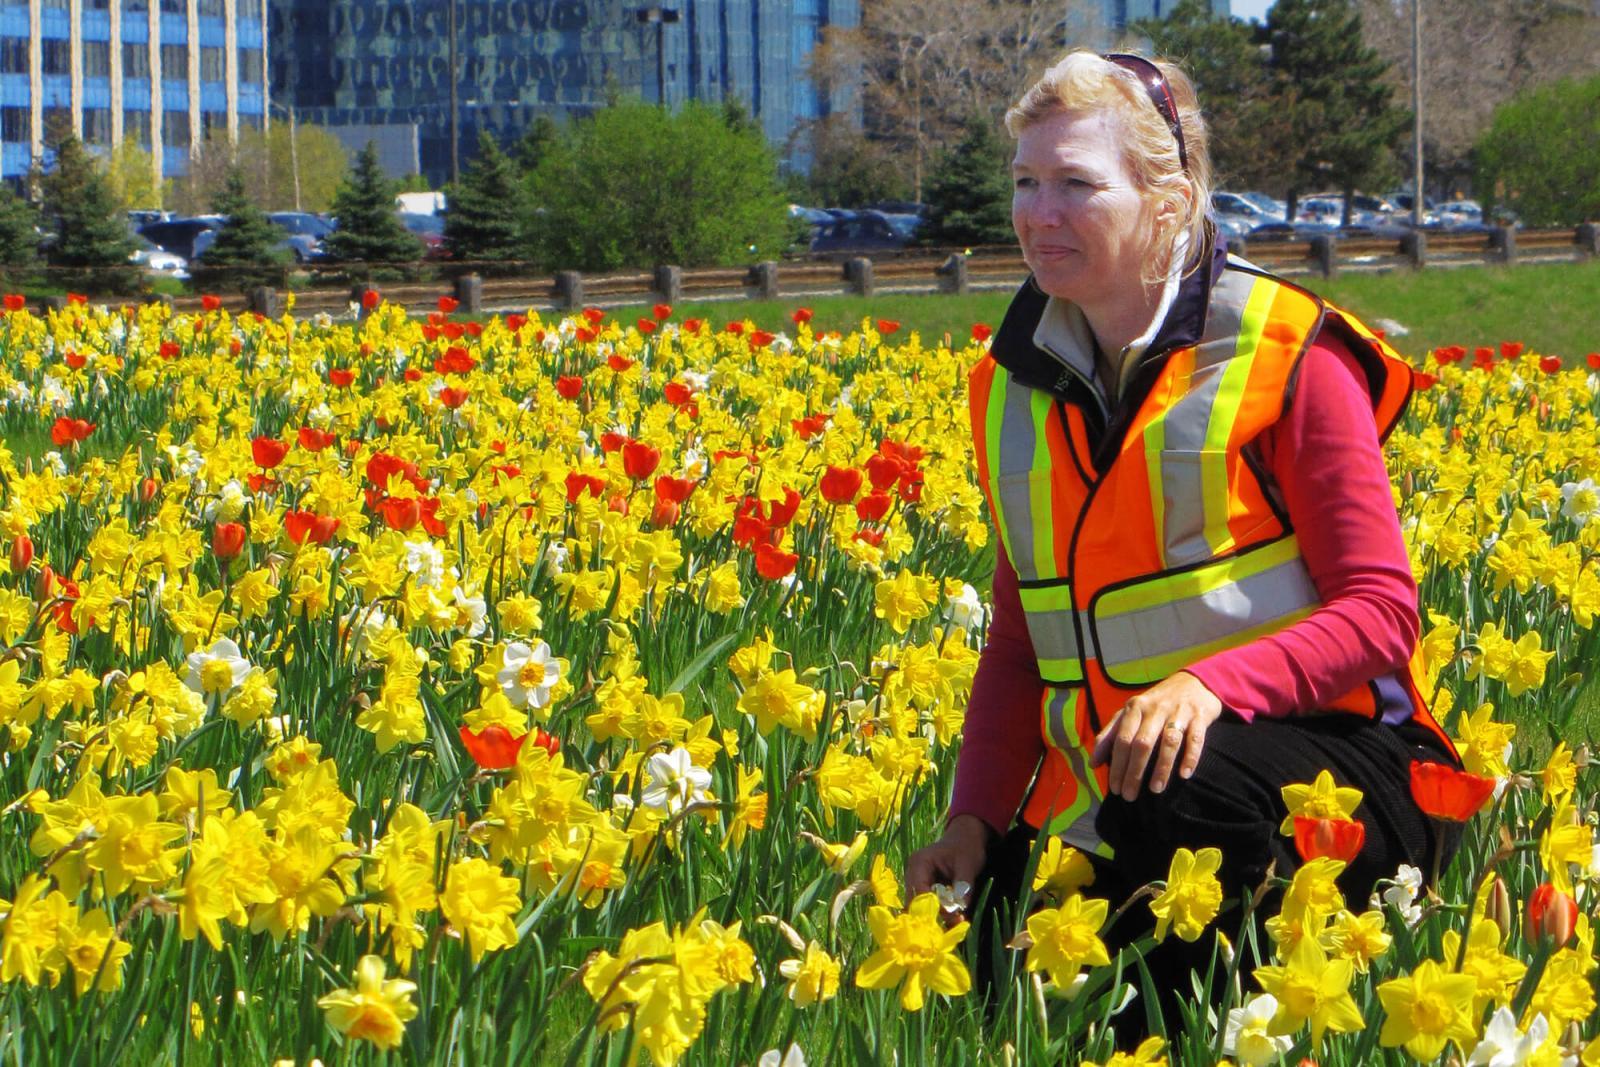 Mass bulb planting beautifies busy highways